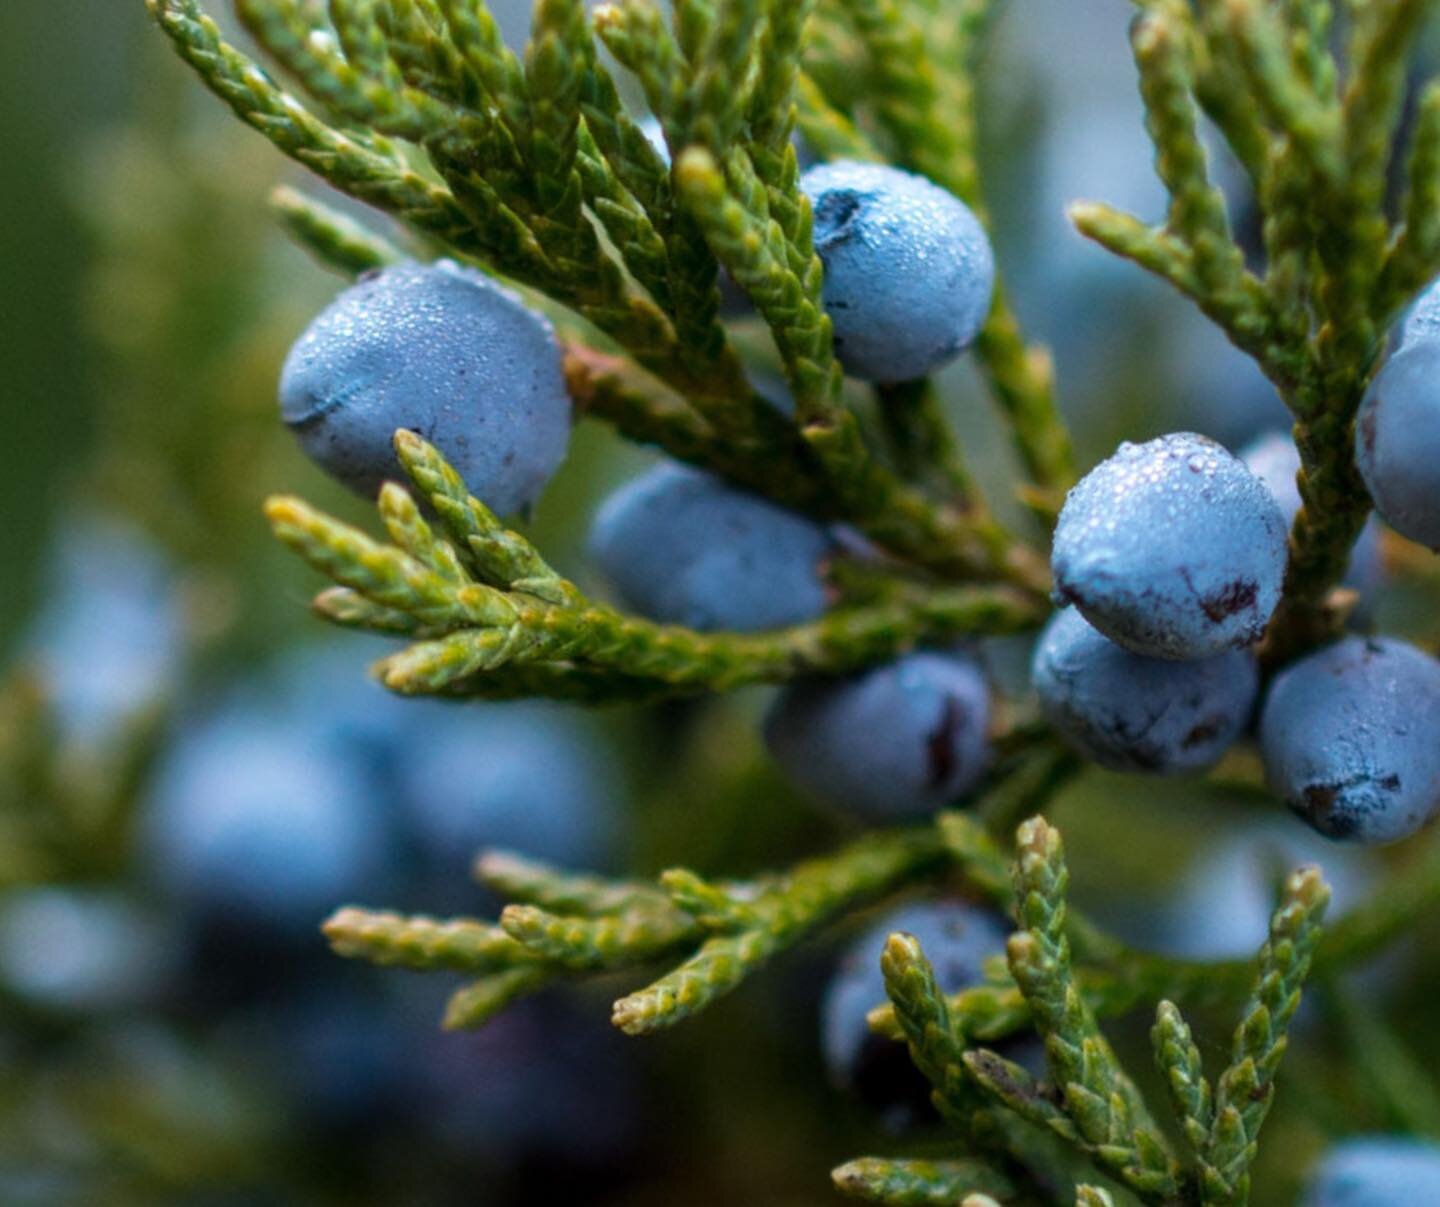 Juniper berries have long been used in herbal apothecaries as medicine while also being the key ingredient in the alcoholic spirit - gin. As a remedy JUNIPERUS COMMUNIS  is prodigious in addressing conditions of the physical body and psyche alike. Th